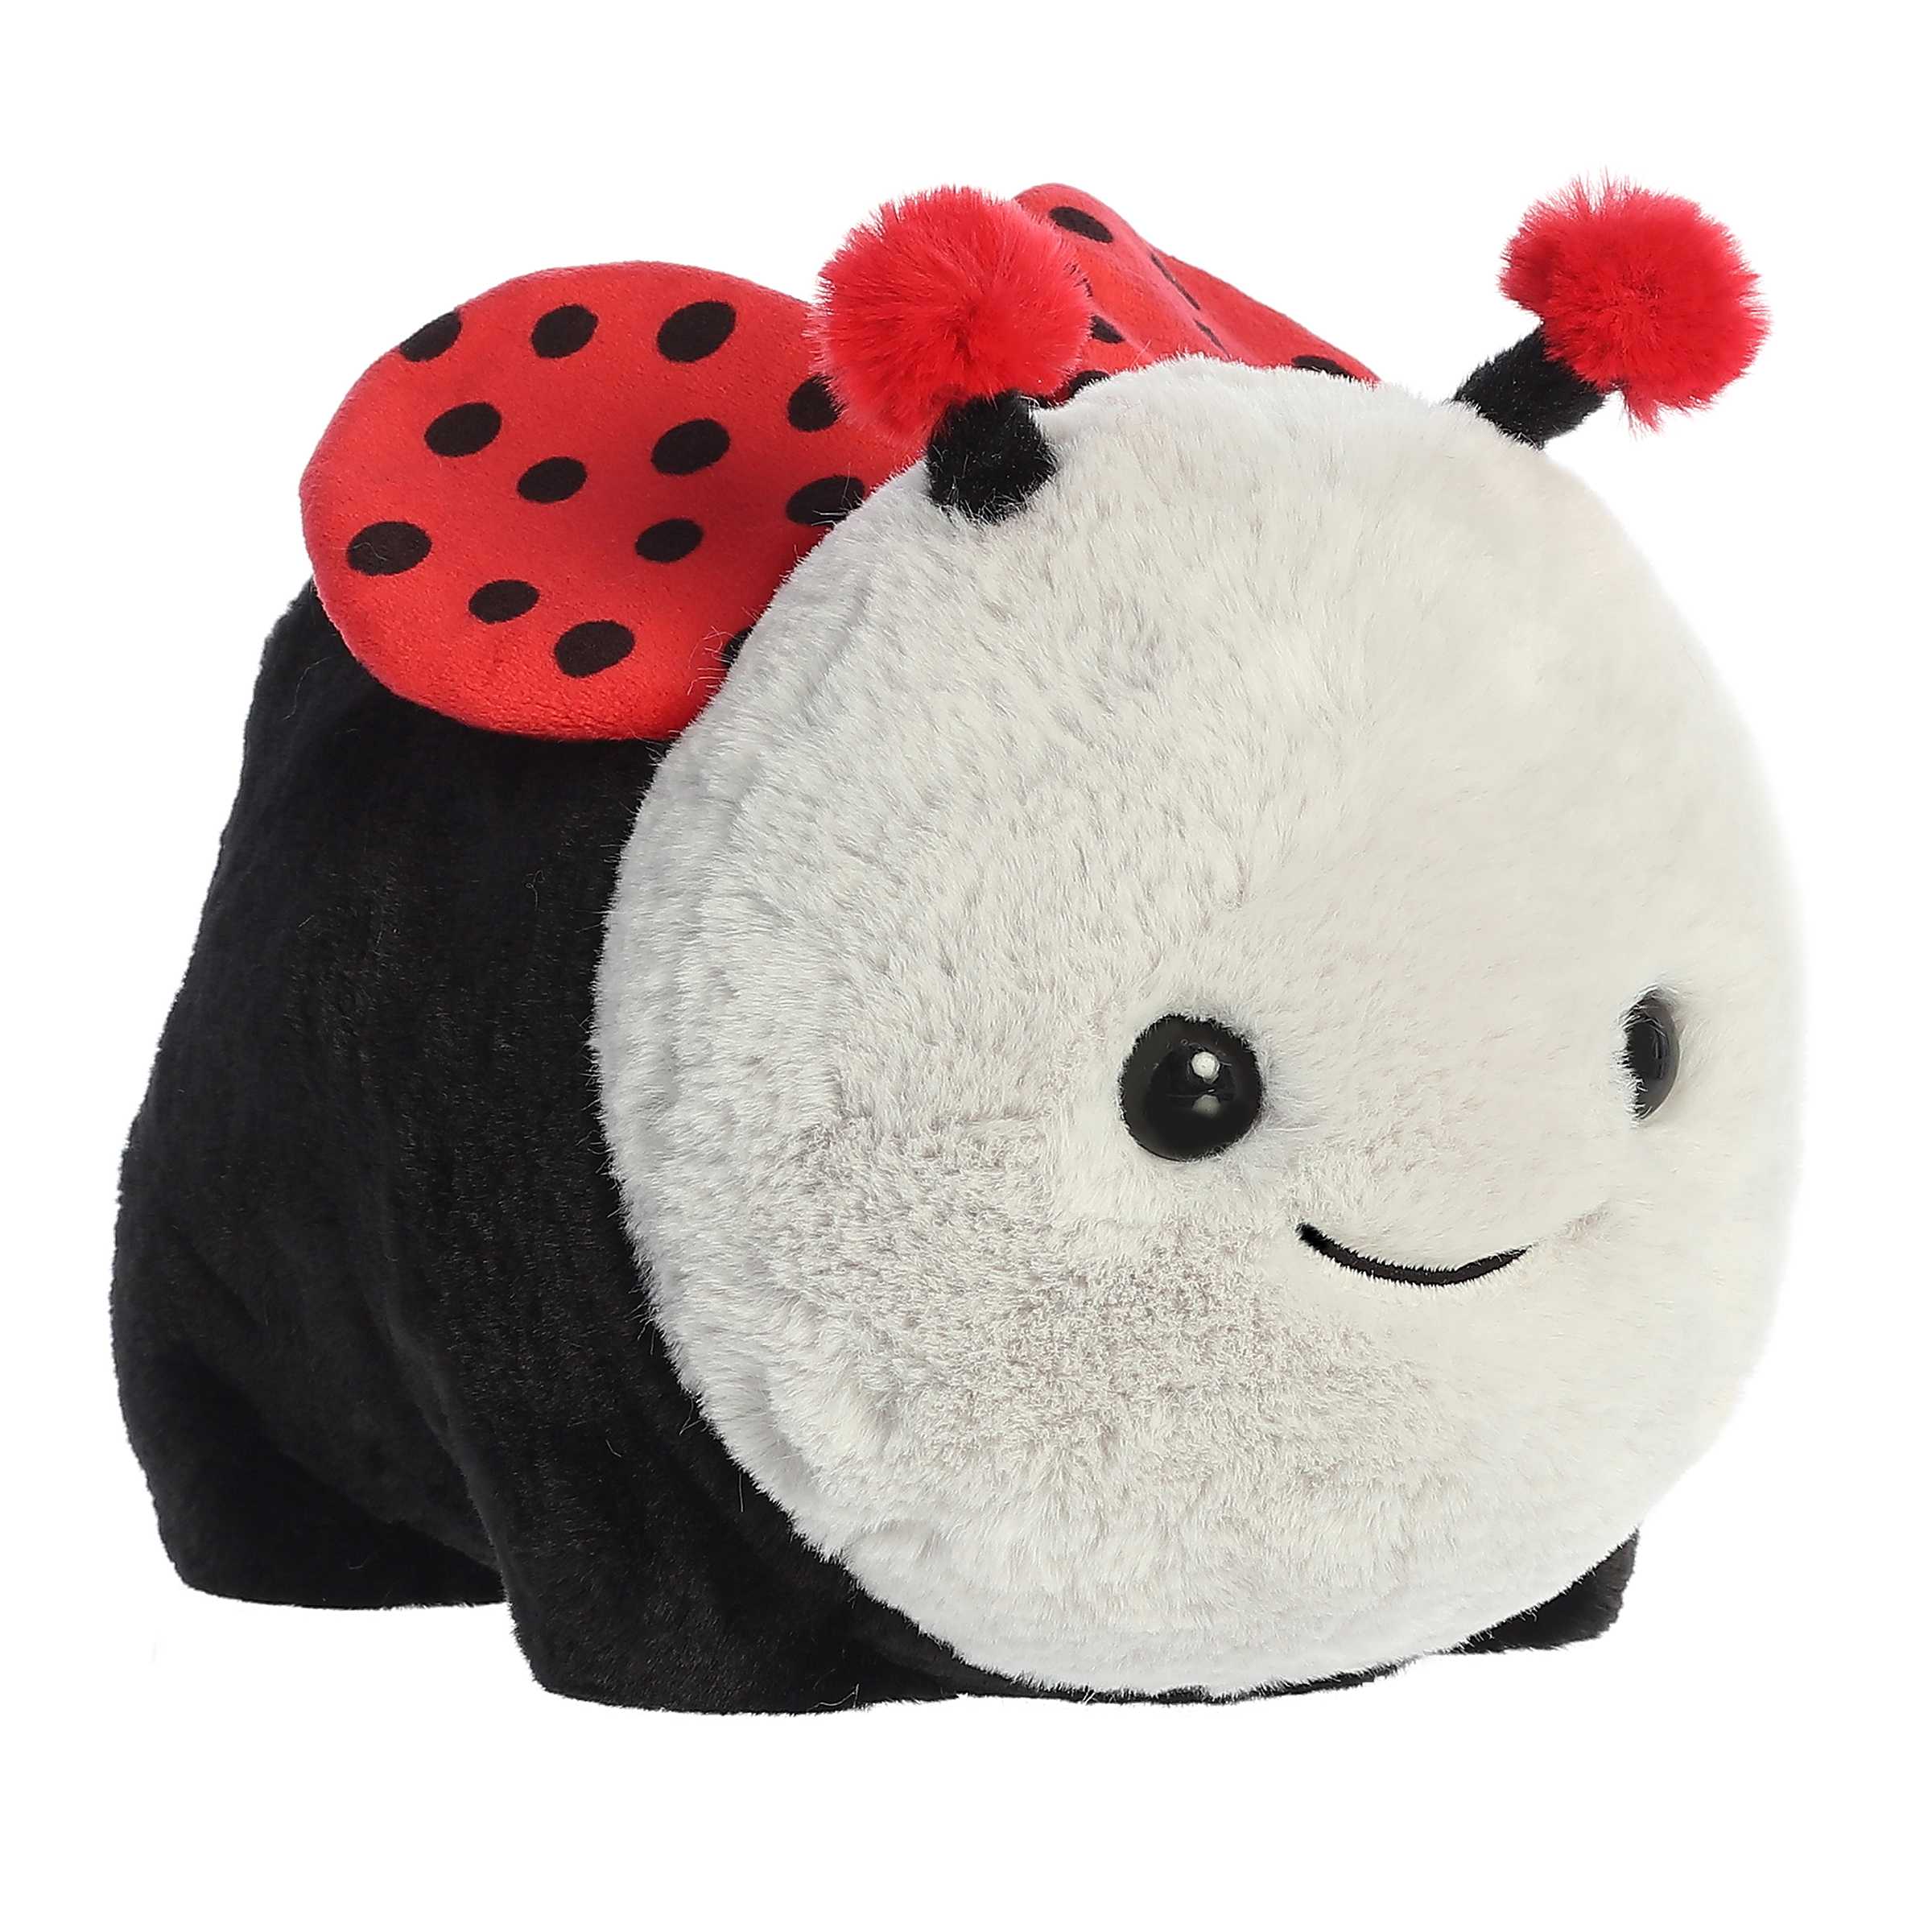 Ladybug plush from the Spudsters collection, featuring a black body, red wings with black spots, and a gray face.